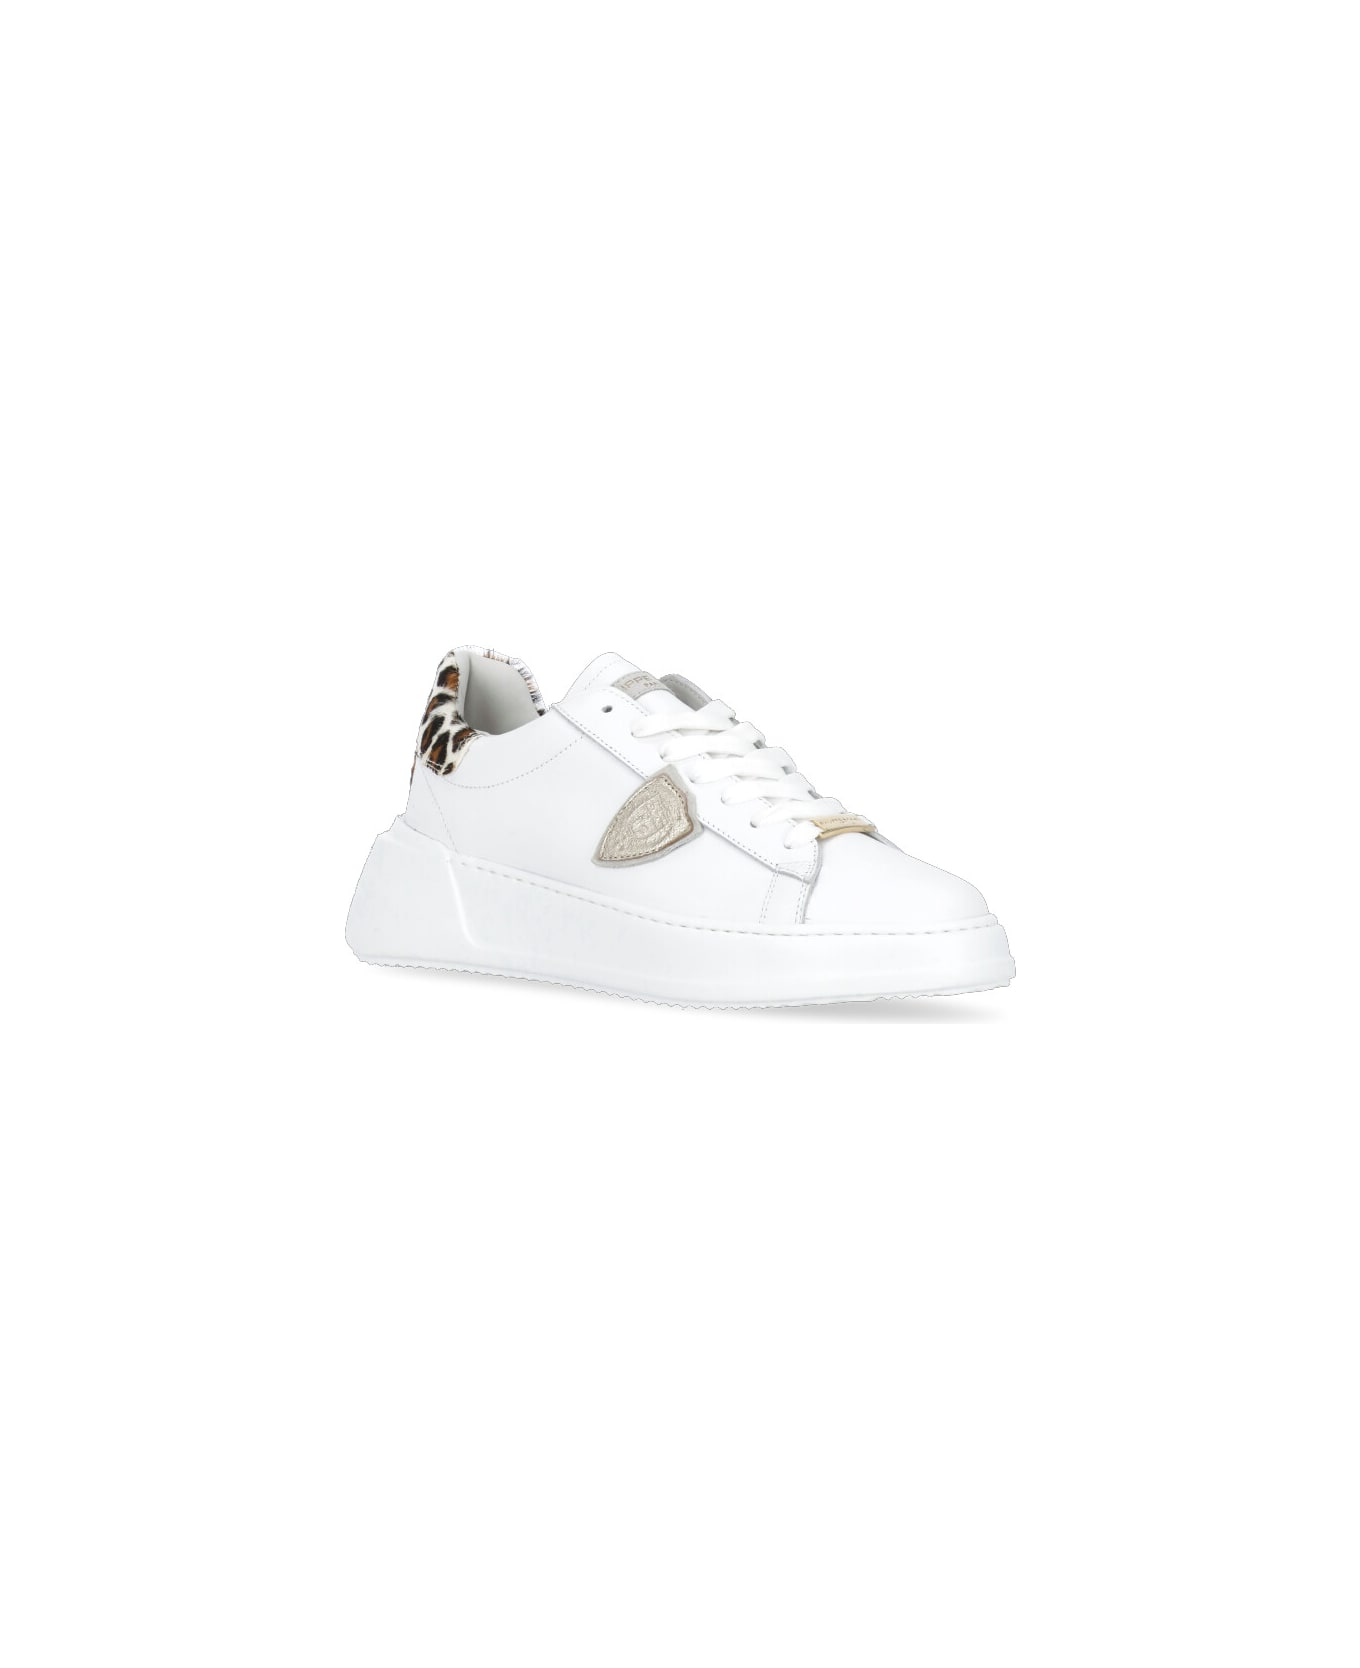 Philippe Model Tres Temple Low Sneakers - White スニーカー